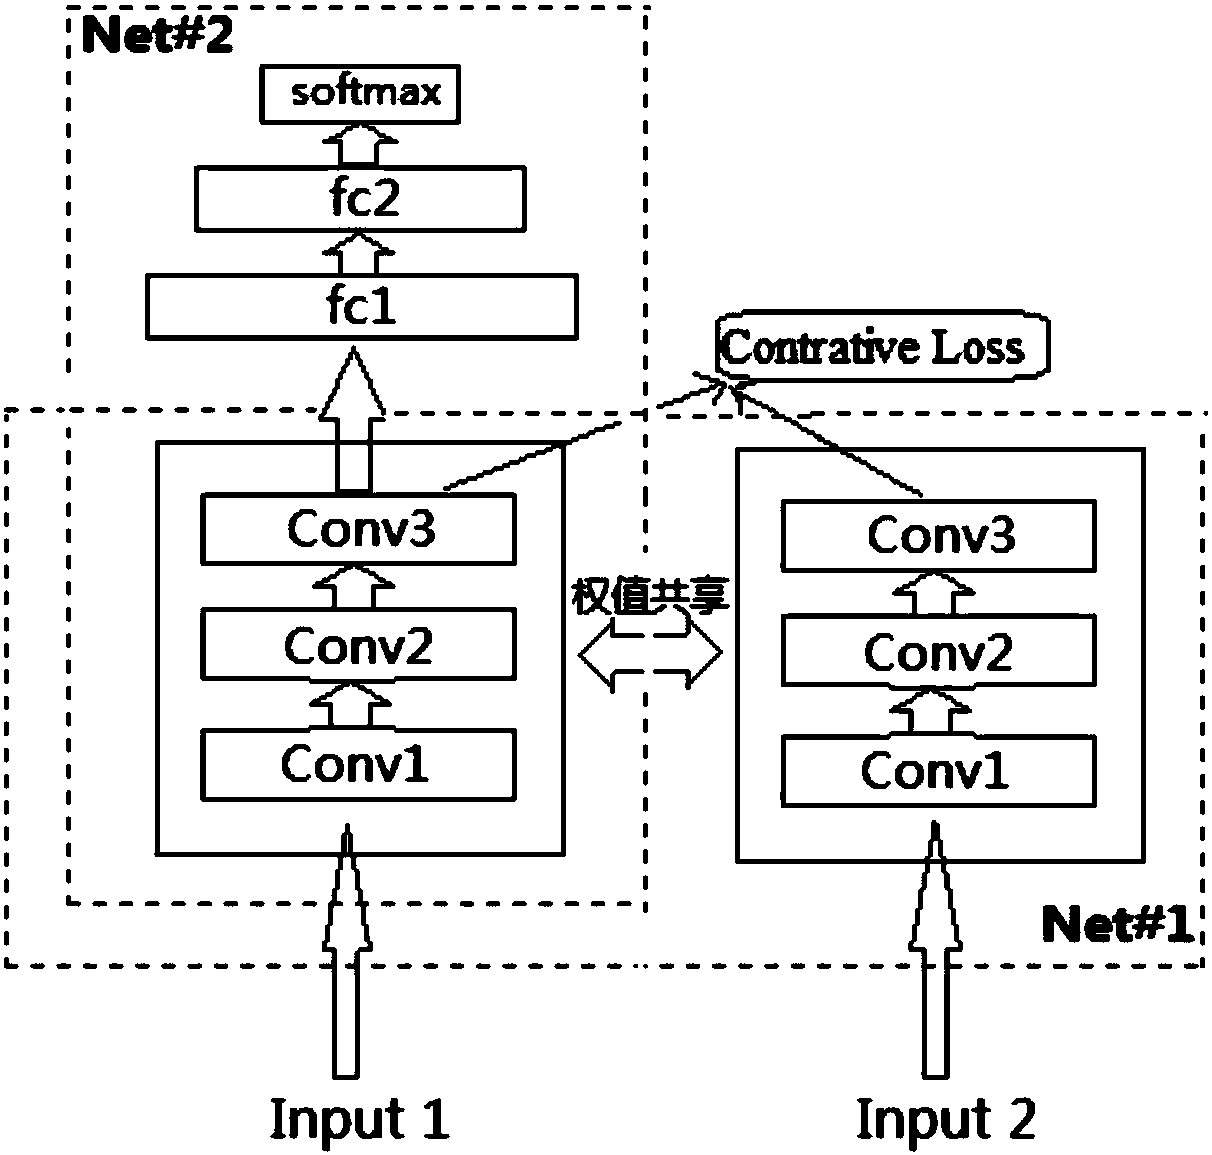 Small-sample polarized SAR ground feature classification method based on deep convolutional twin network